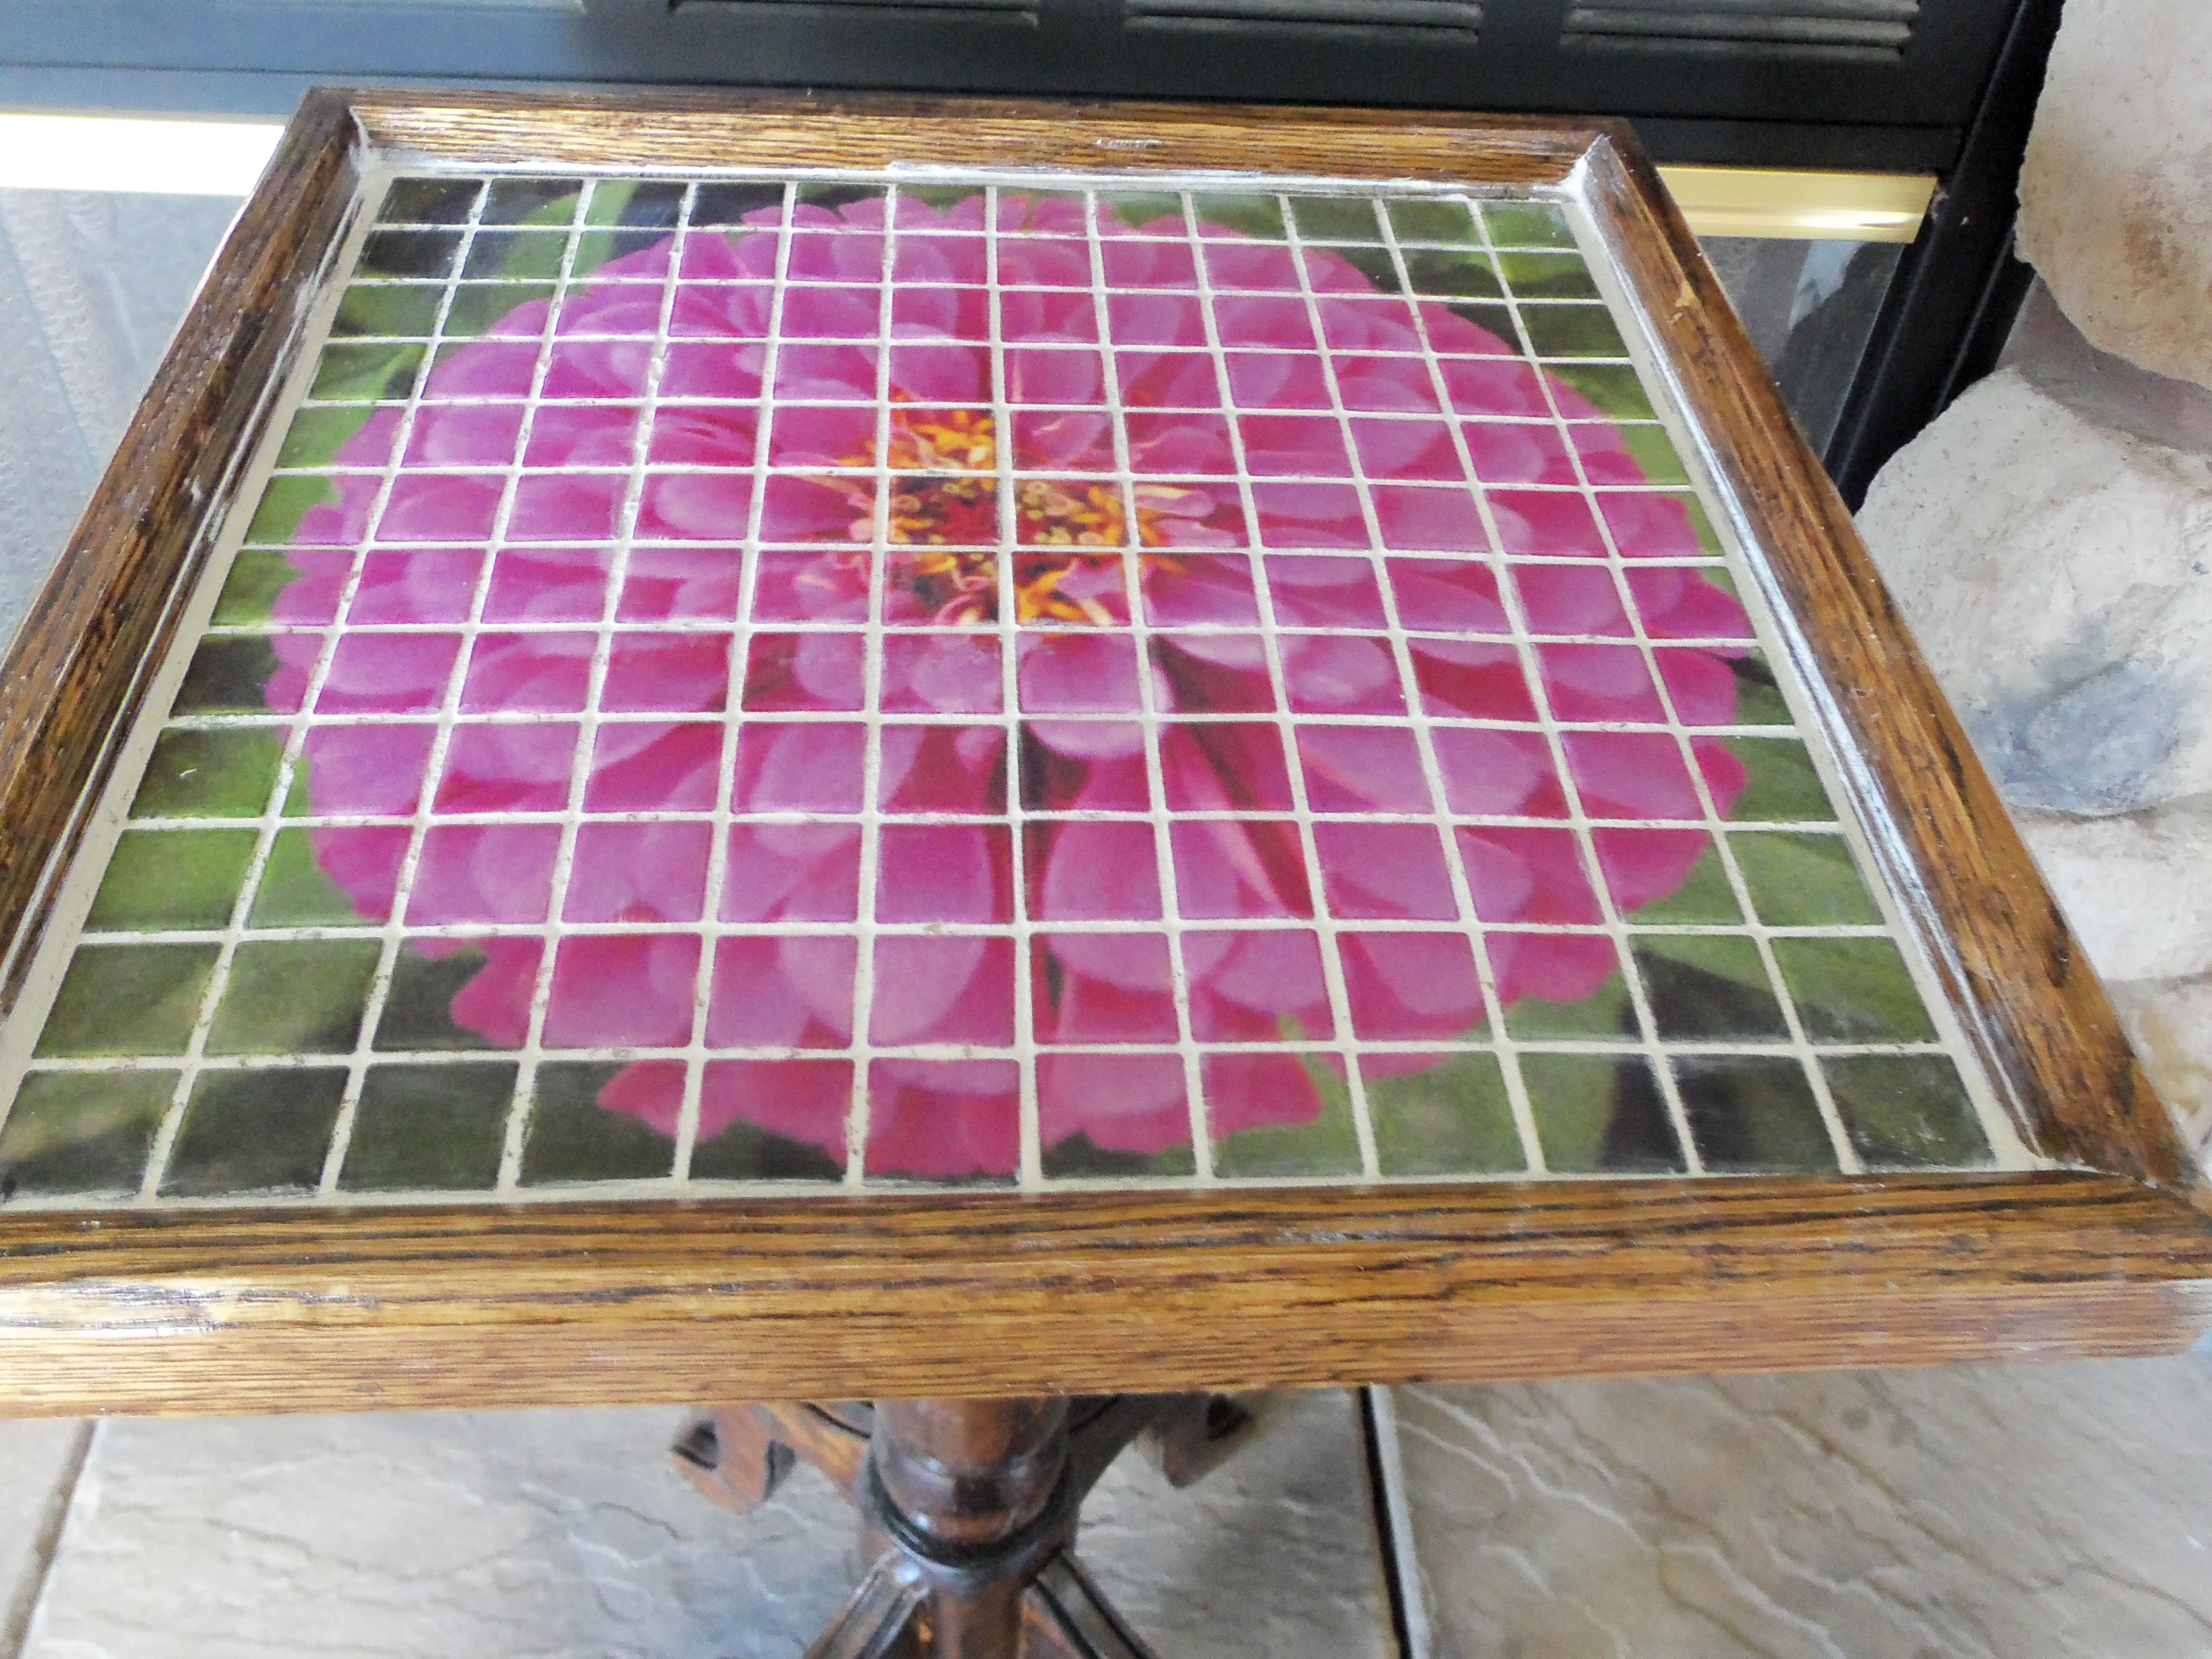 1x1 tile table made with sublimation printing